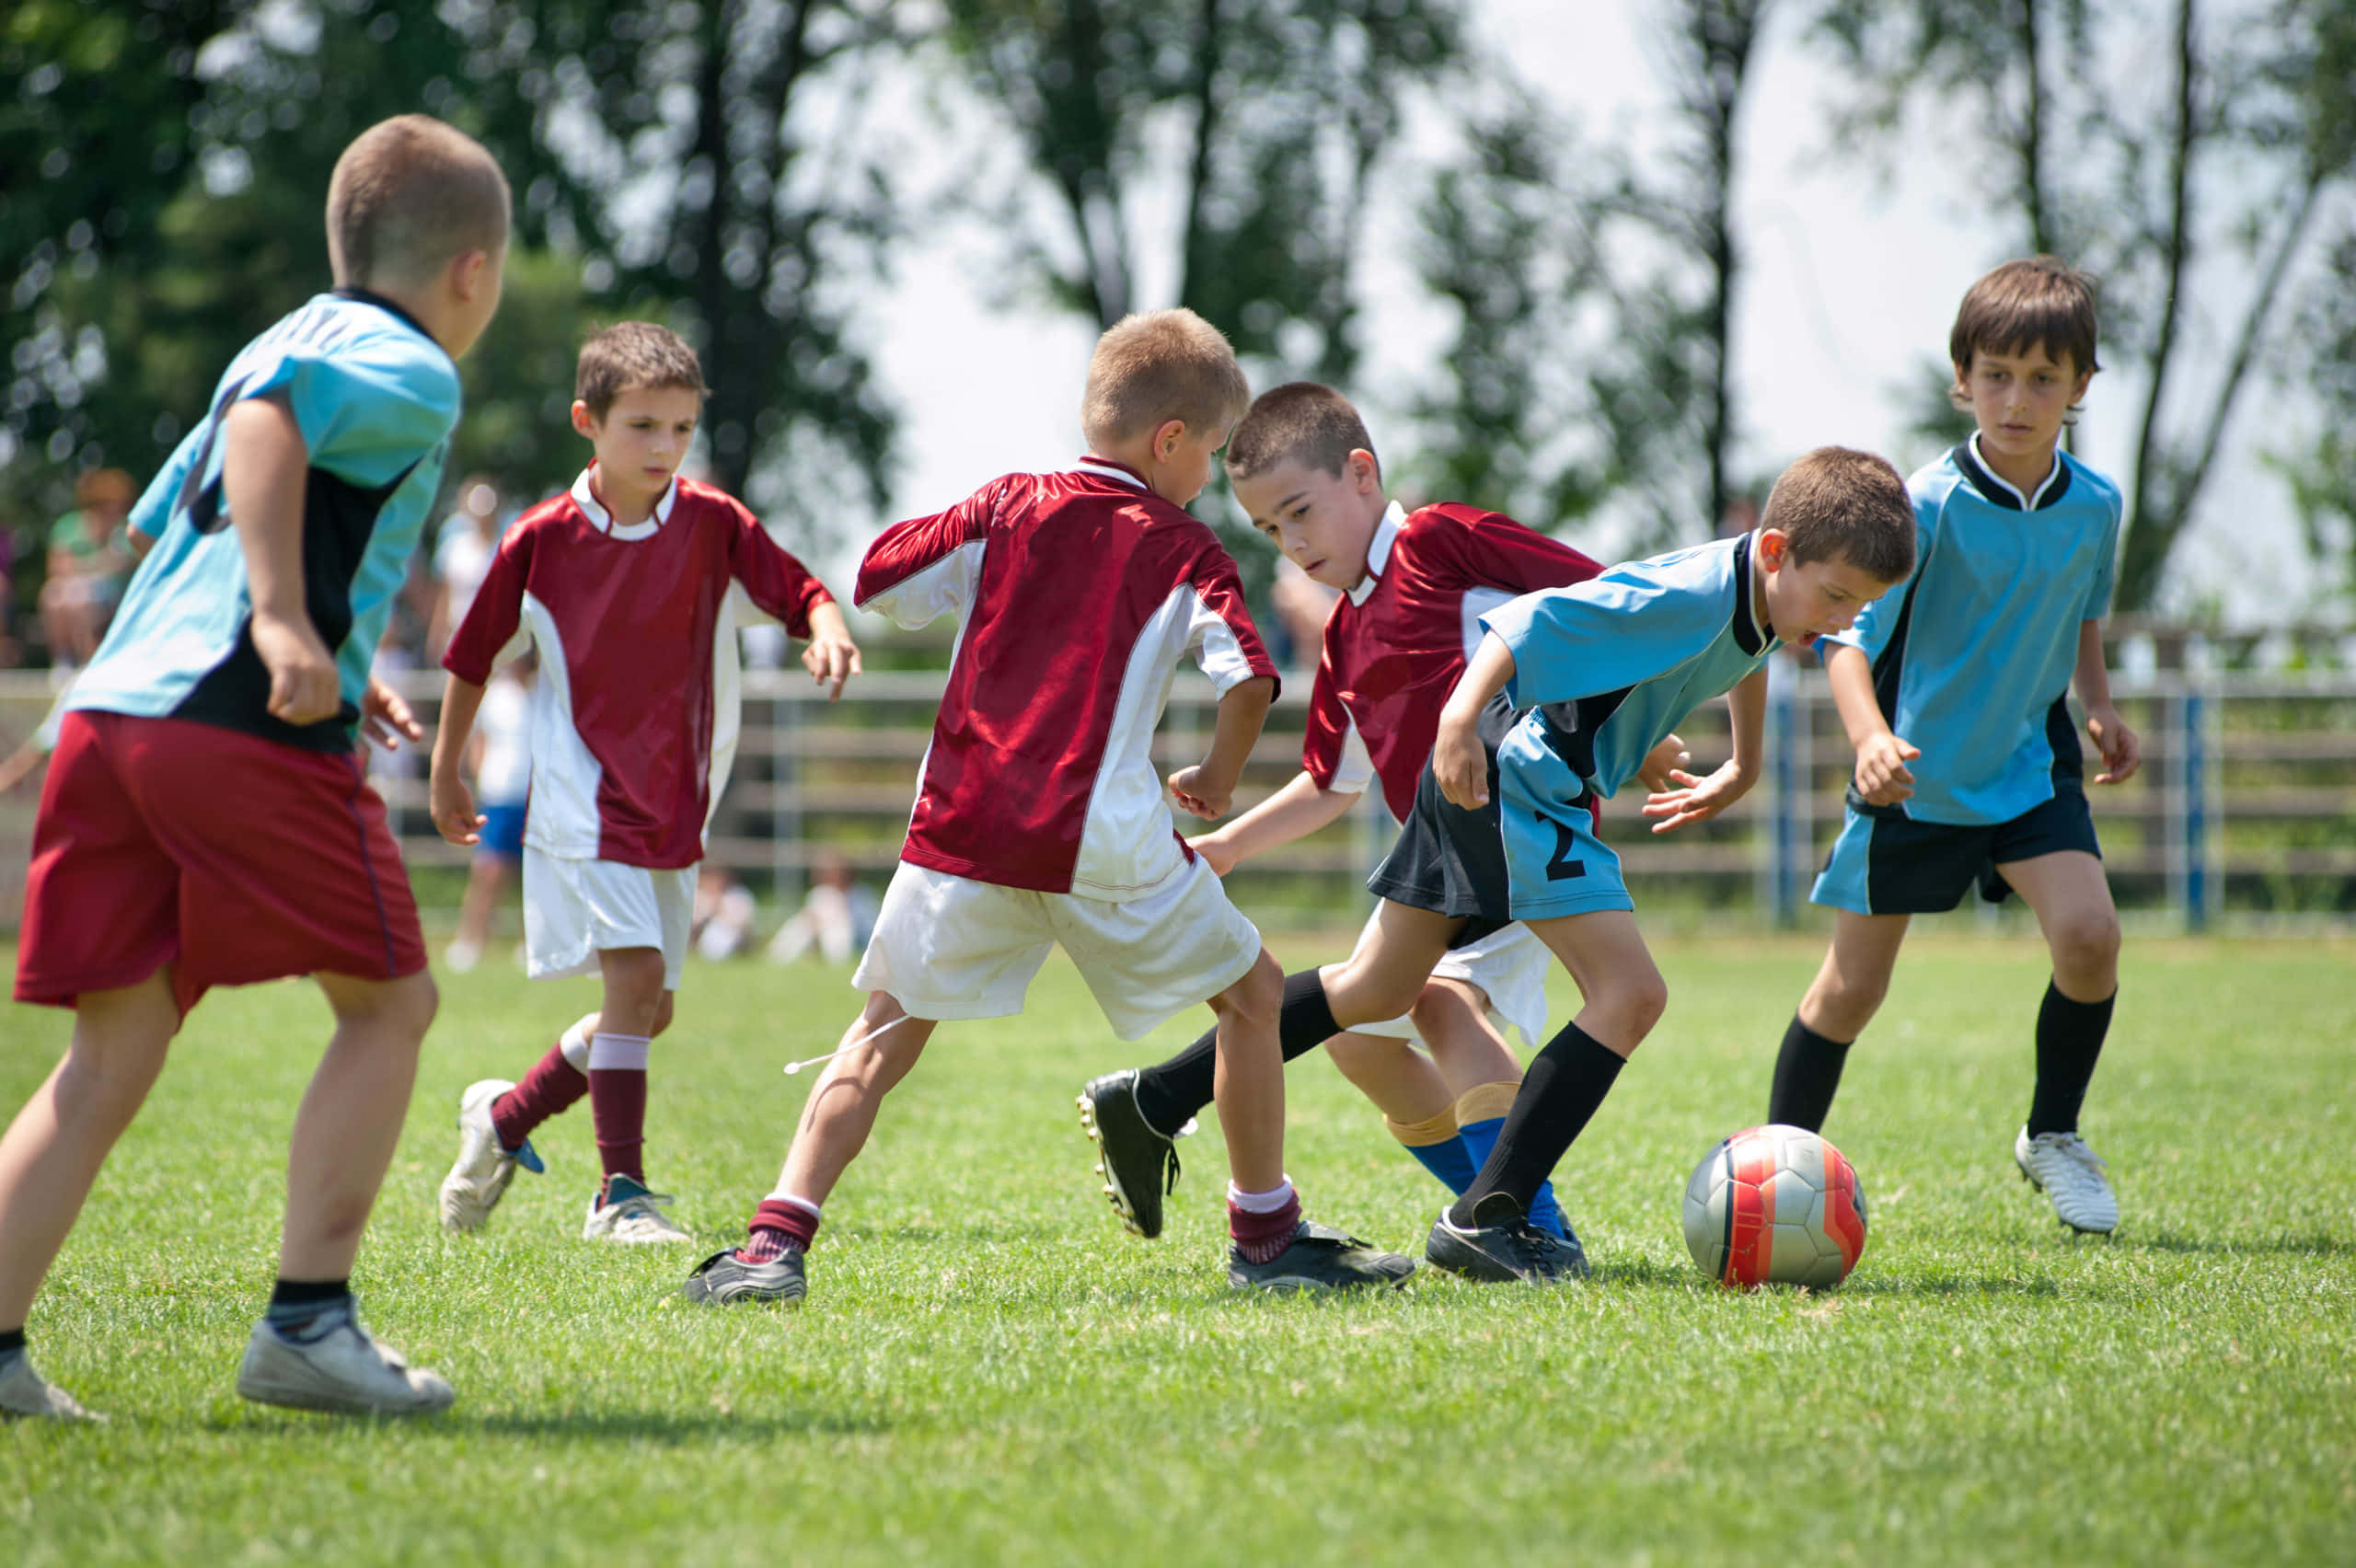 Enthusiastic Young Soccer Players In Action Wallpaper